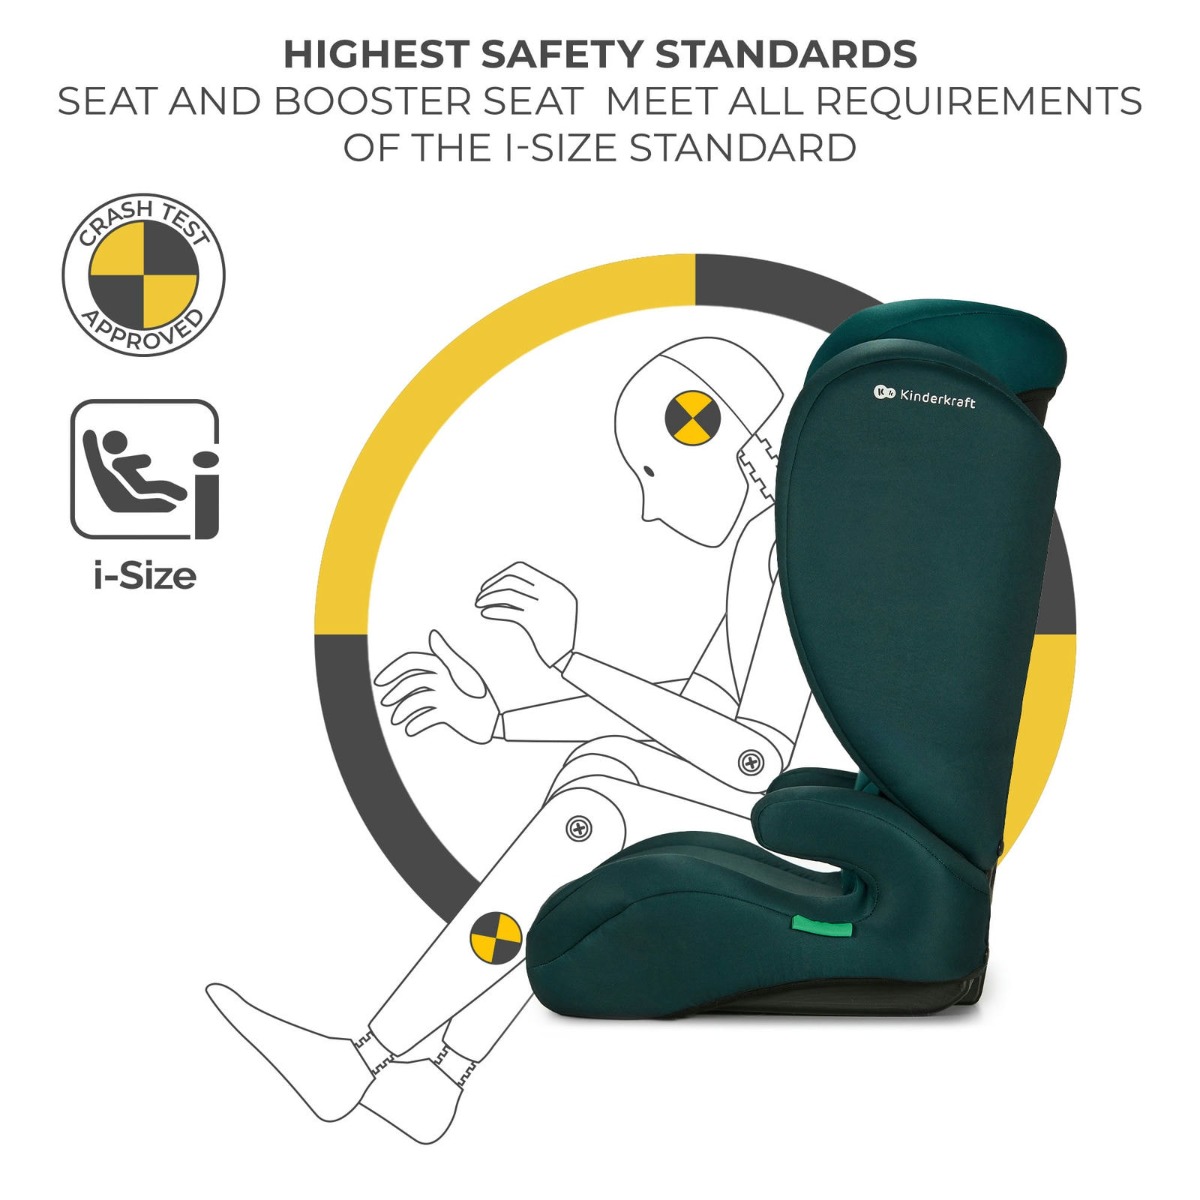 Car seat 2in1 I-SPARK i-Size green